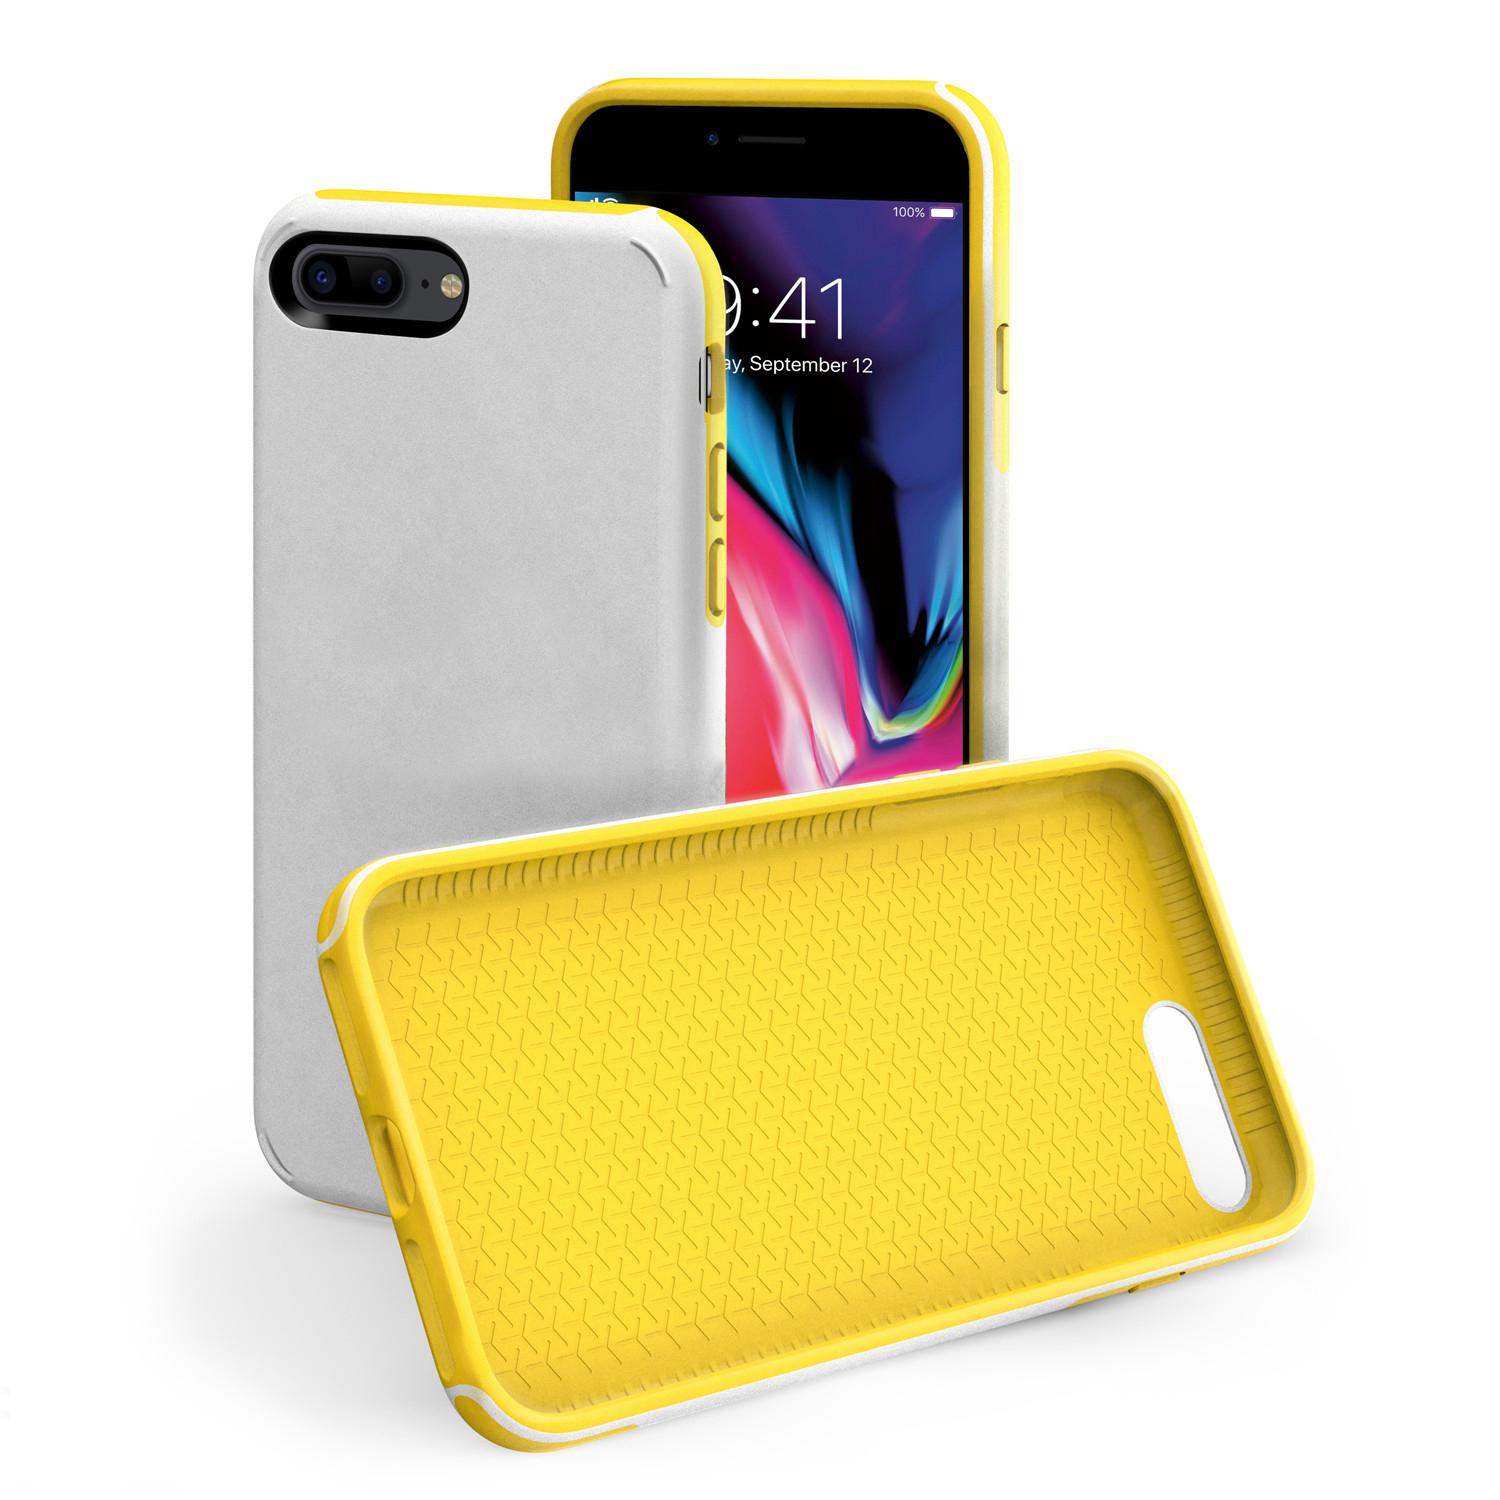 KMP Sporty Passion 8 passion Plus, Plus Schutzhülle für 8 iPhone Backcover, yellow Gray/Yellow, / iPhone Apple, gray